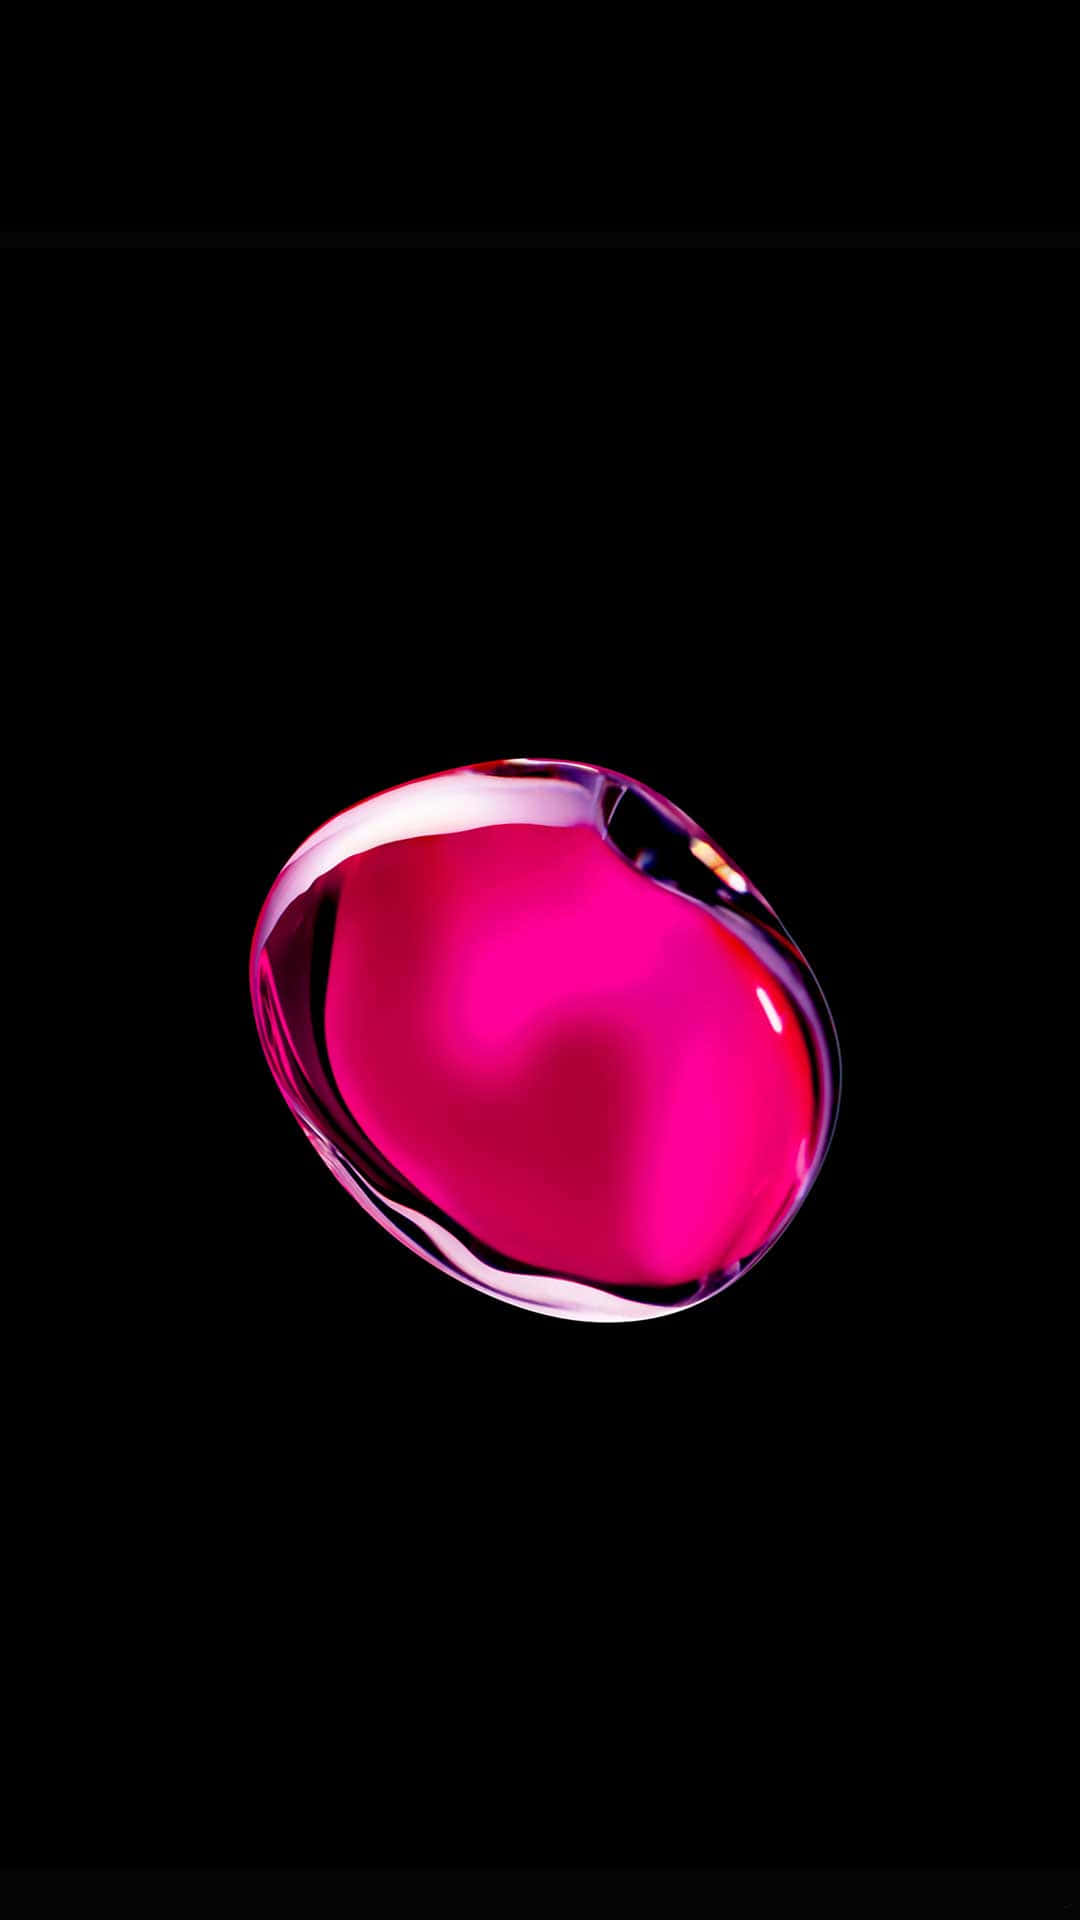 A Pink Liquid On A Black Background Wallpaper